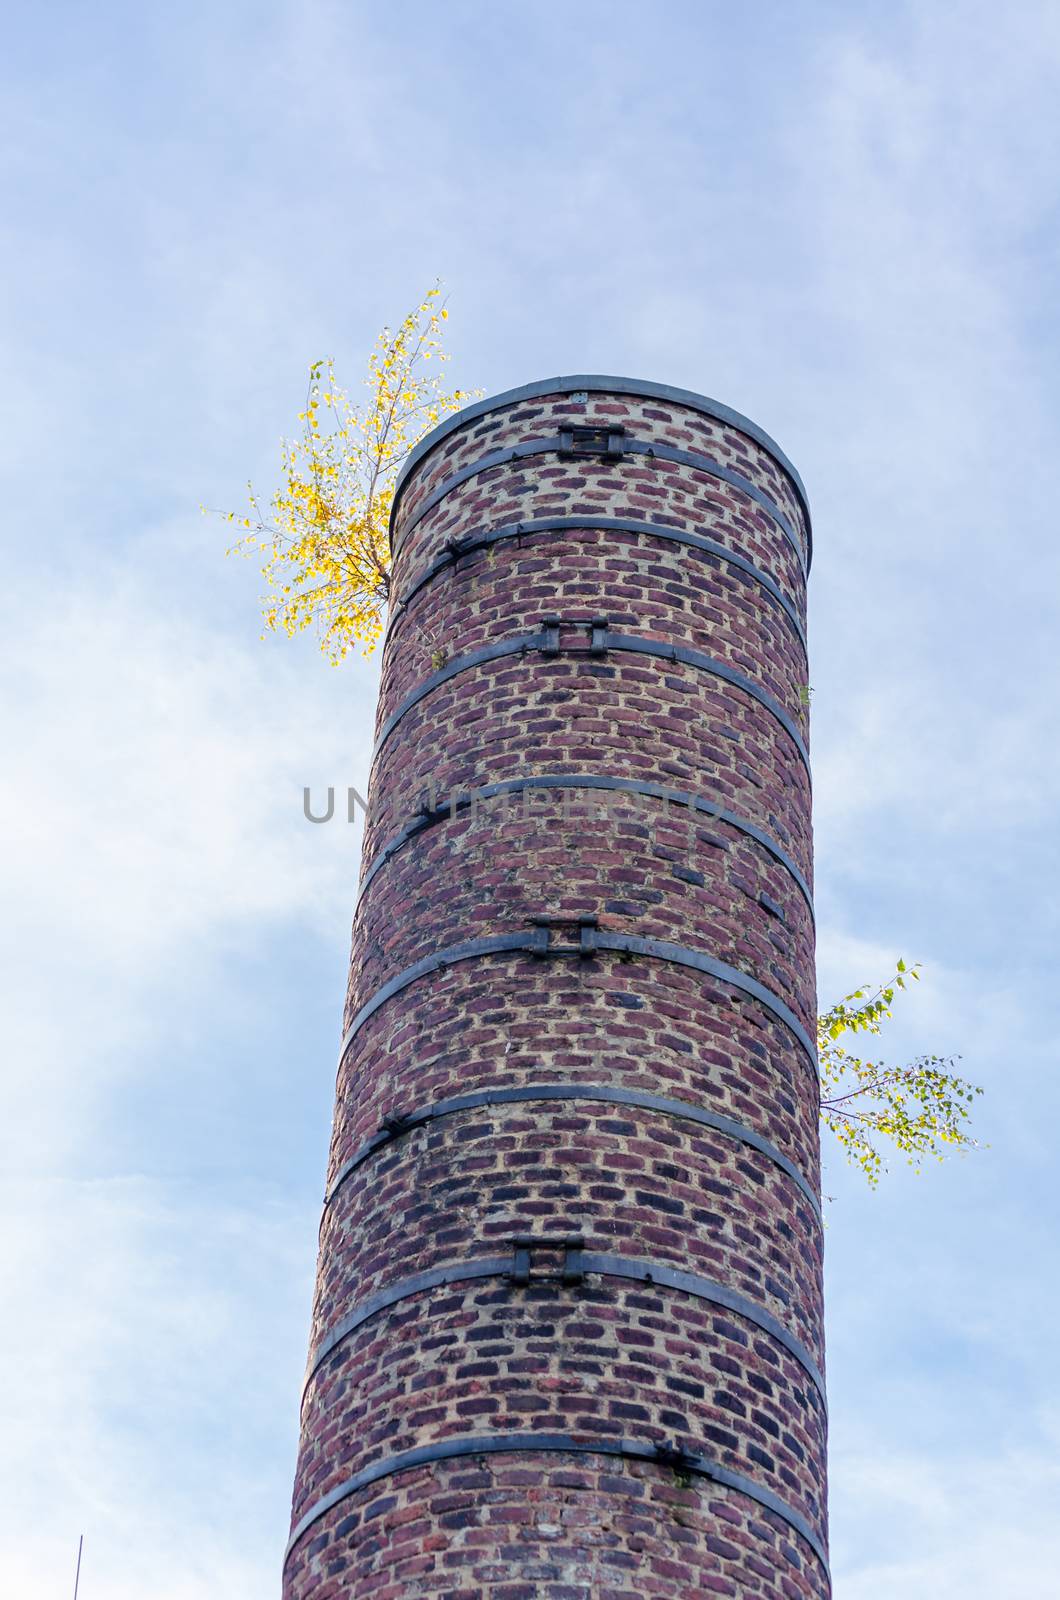 Chimney, chimney of an industrial plant. With tree plantings.